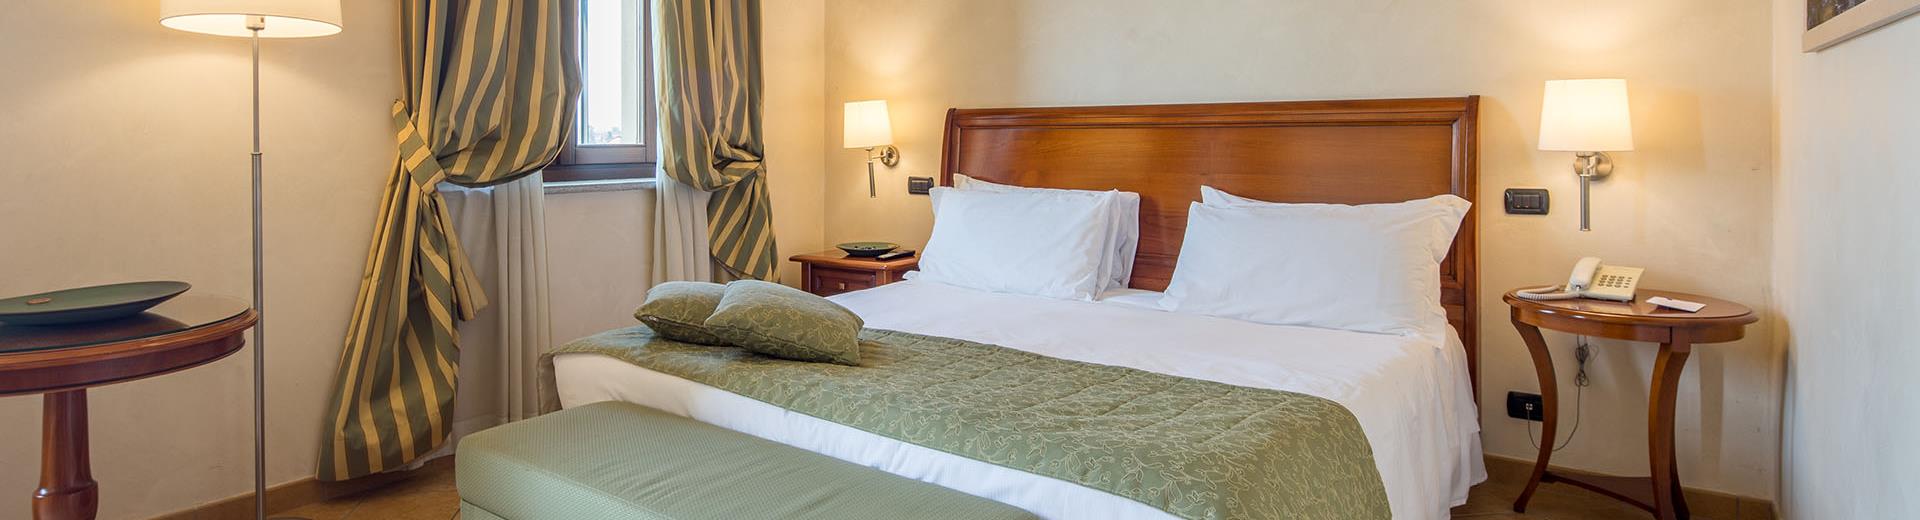 Are you looking for a hotel for your stay near Turin airport? Make a reservation at the Best Western Plus Hotel Le Rondini